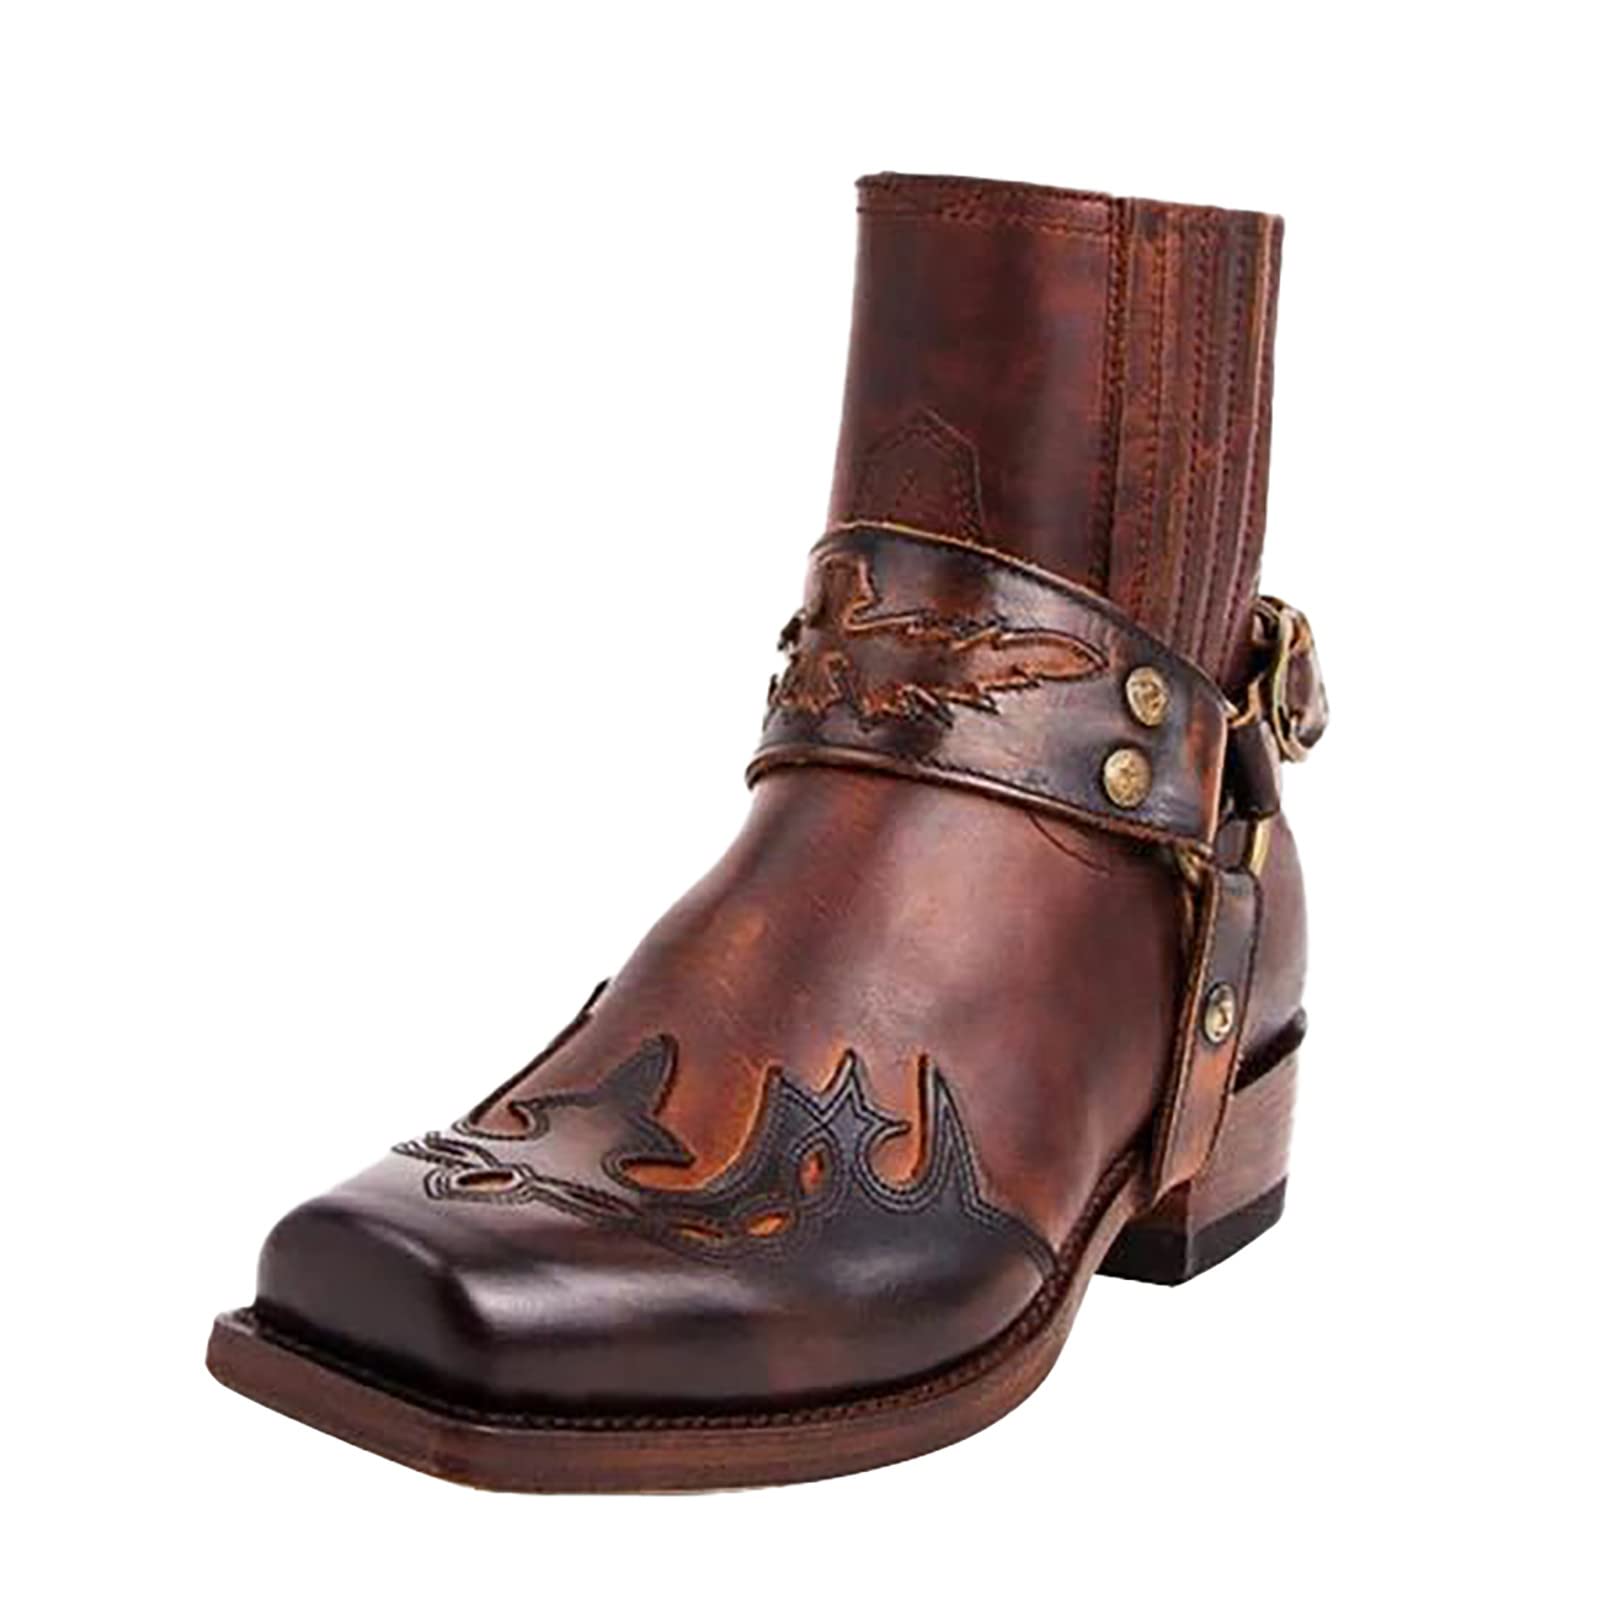 Men's Western Ankle Boots Fashion Buckle Strap Slip-on Boots Retro Leather Pointed Toe Chunky Heel Booties Cowboy Short Boots